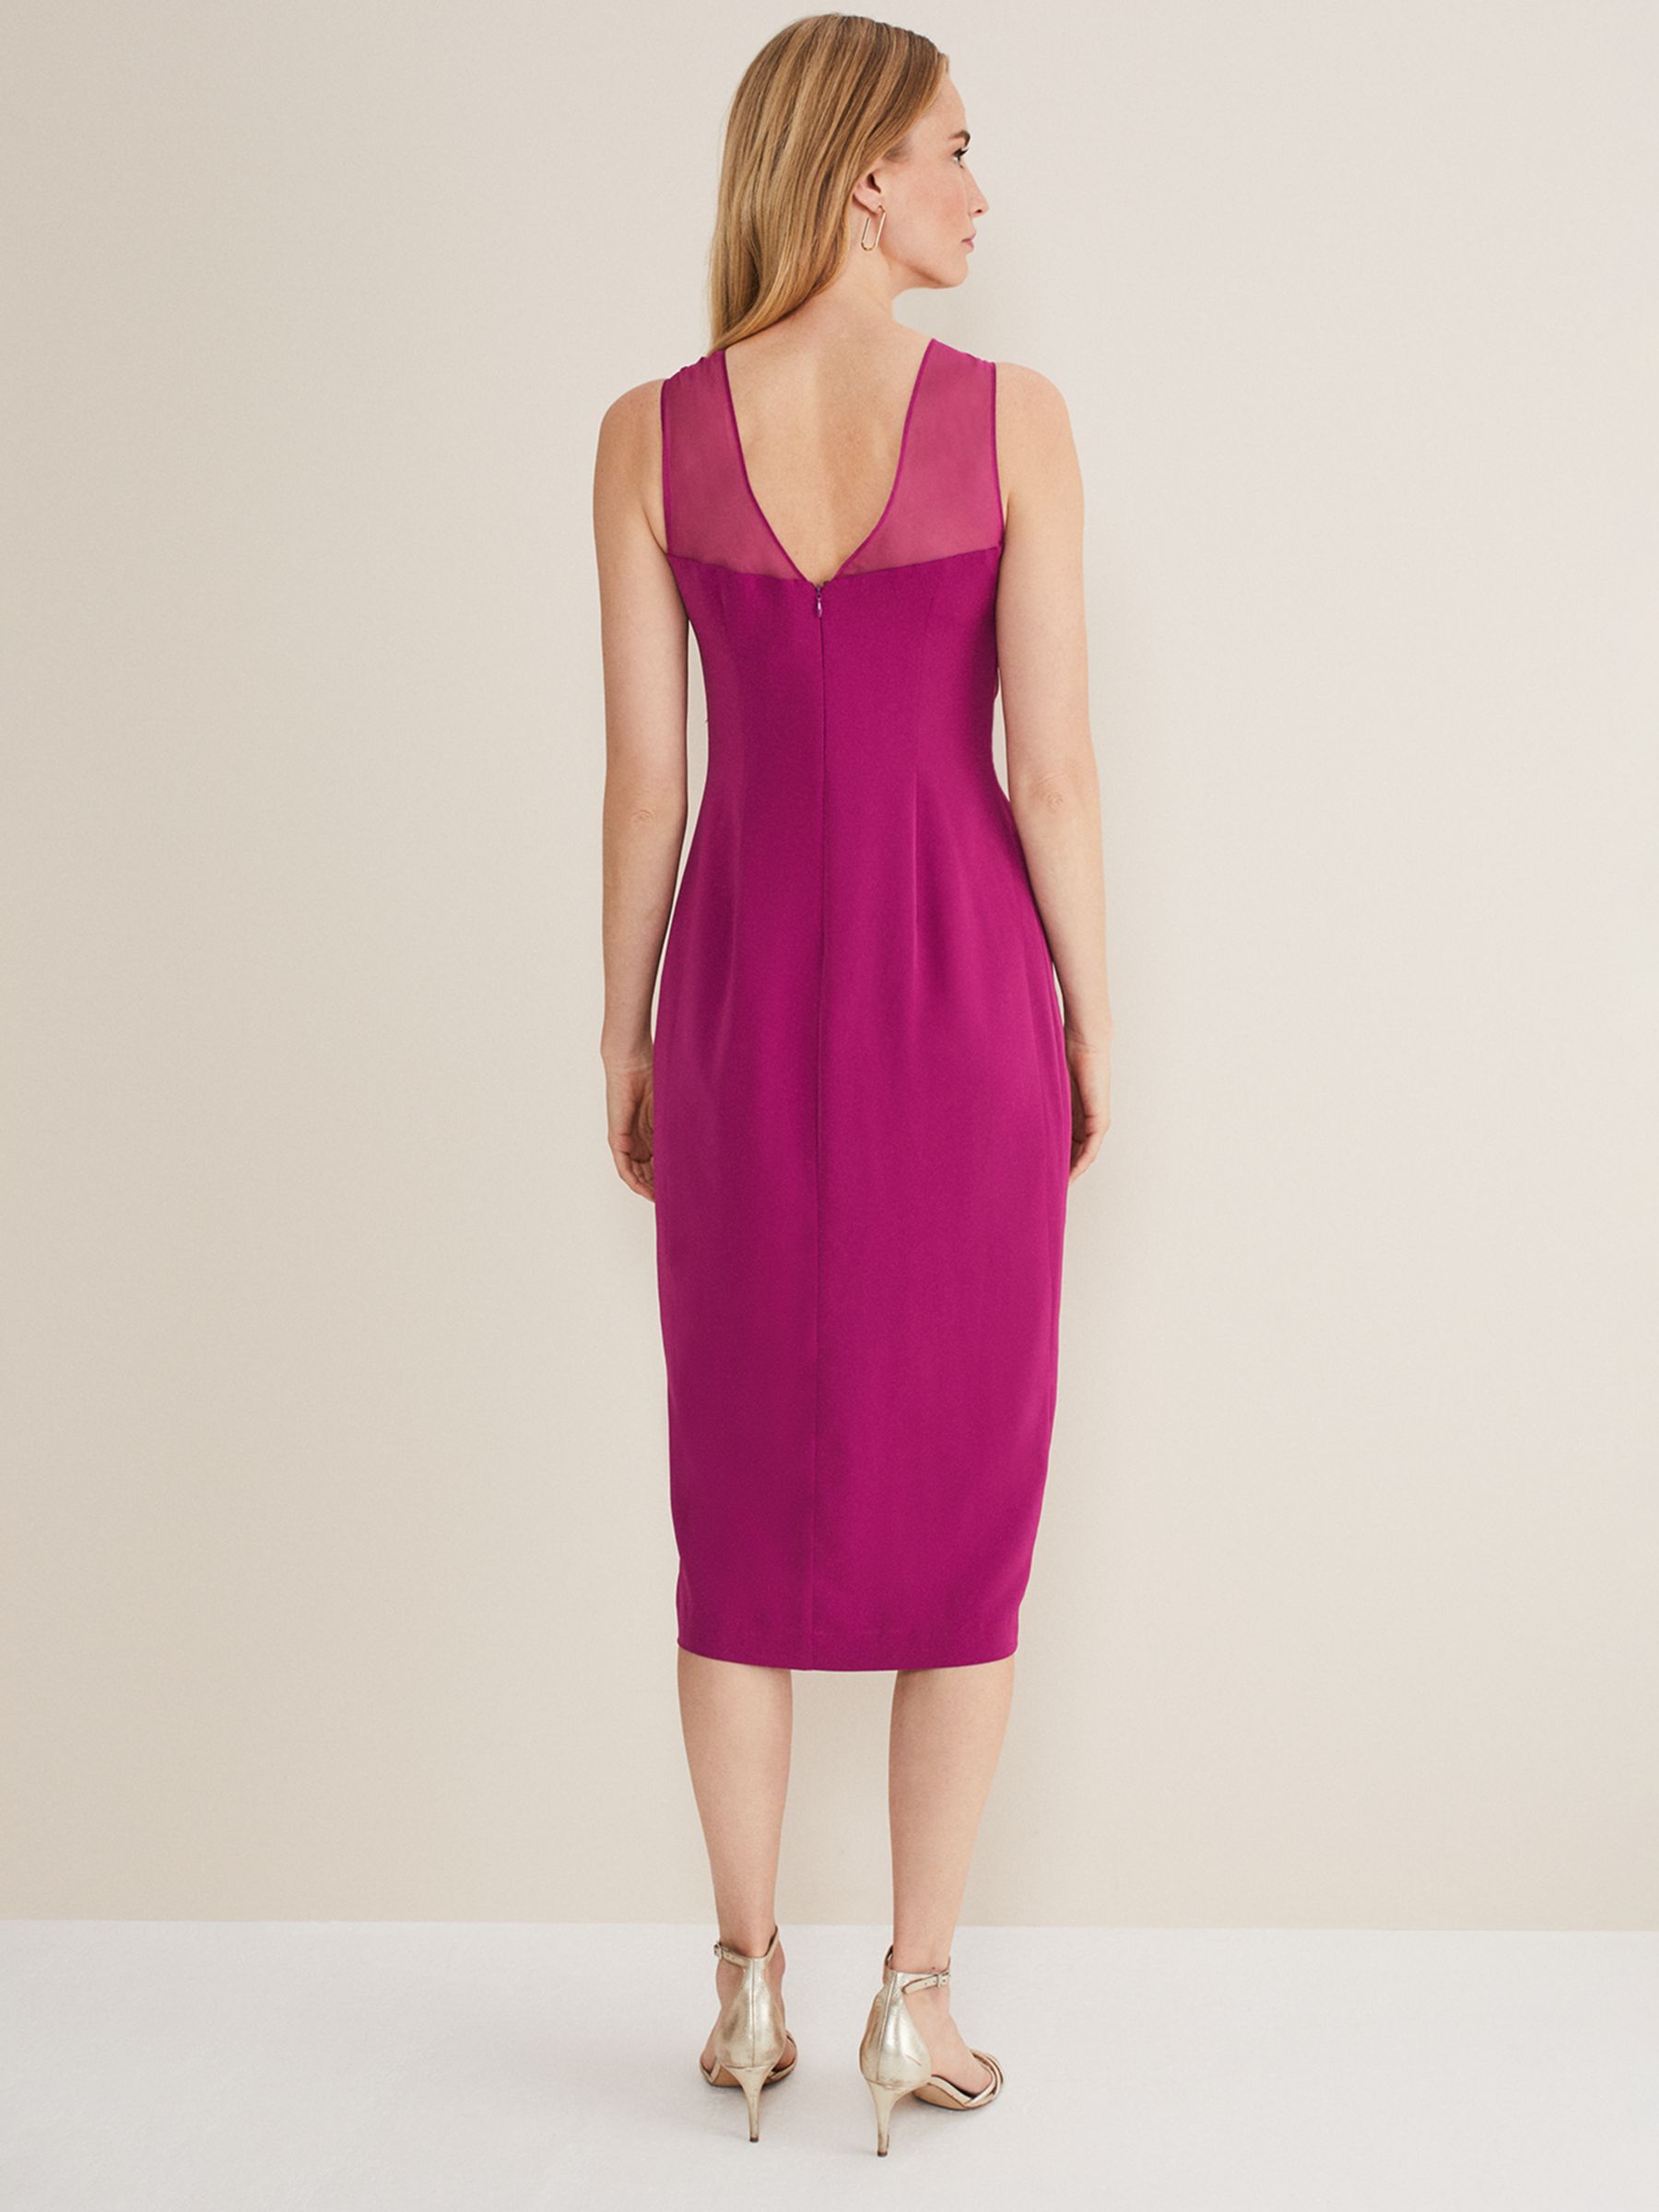 Phase Eight Leah Ruched Midi Dress, Magenta at John Lewis & Partners